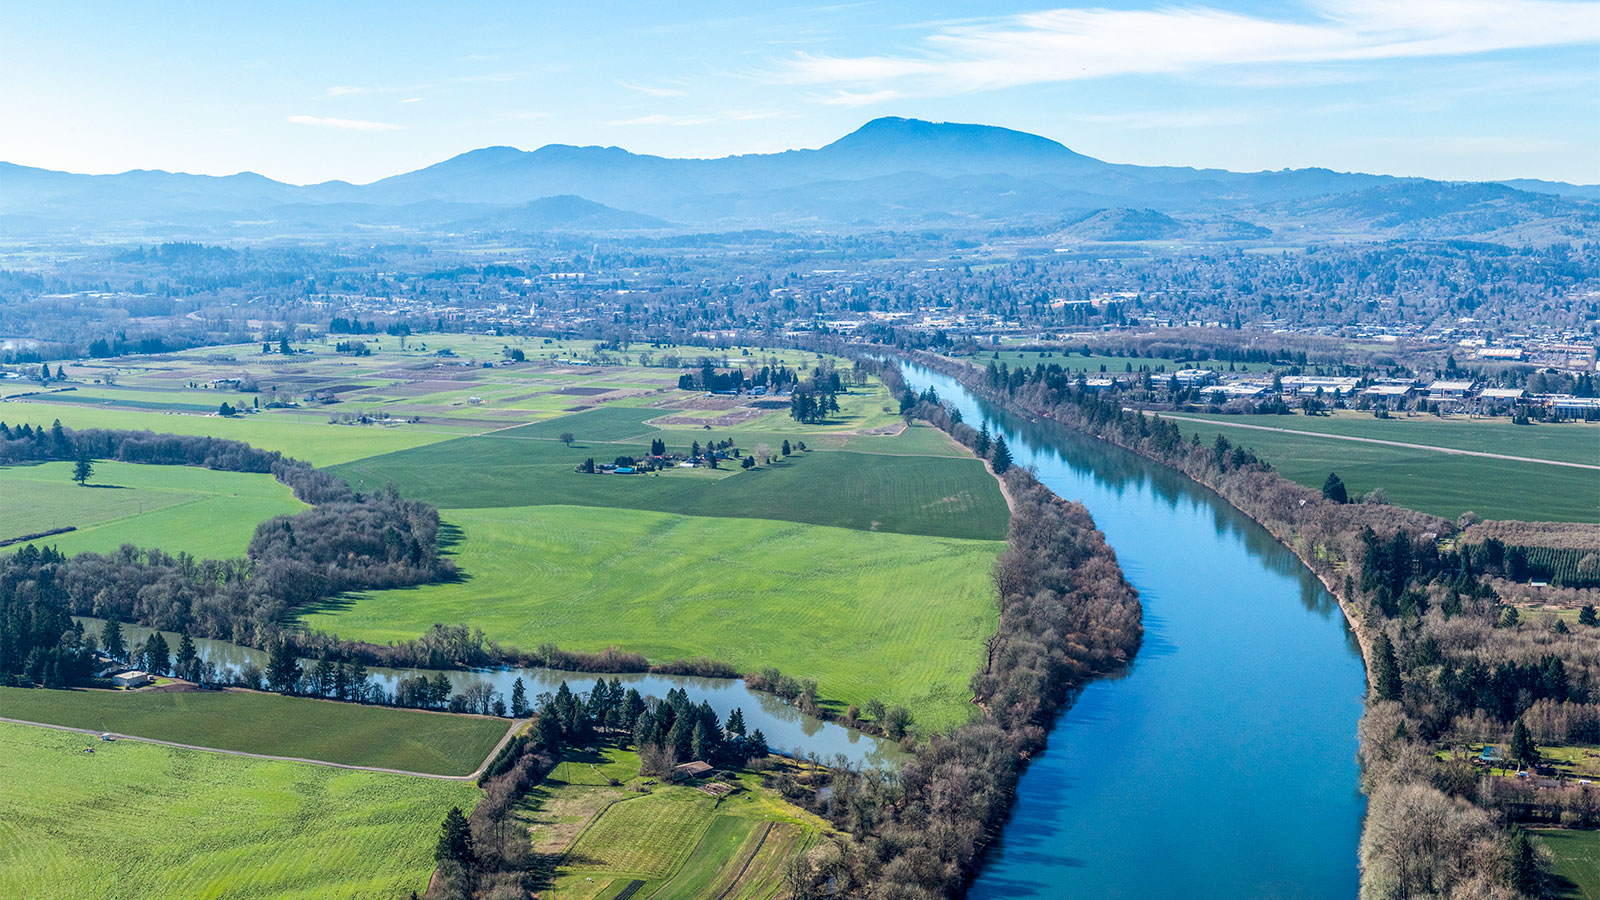 An aerial view of the Willamette Valley in Oregon.